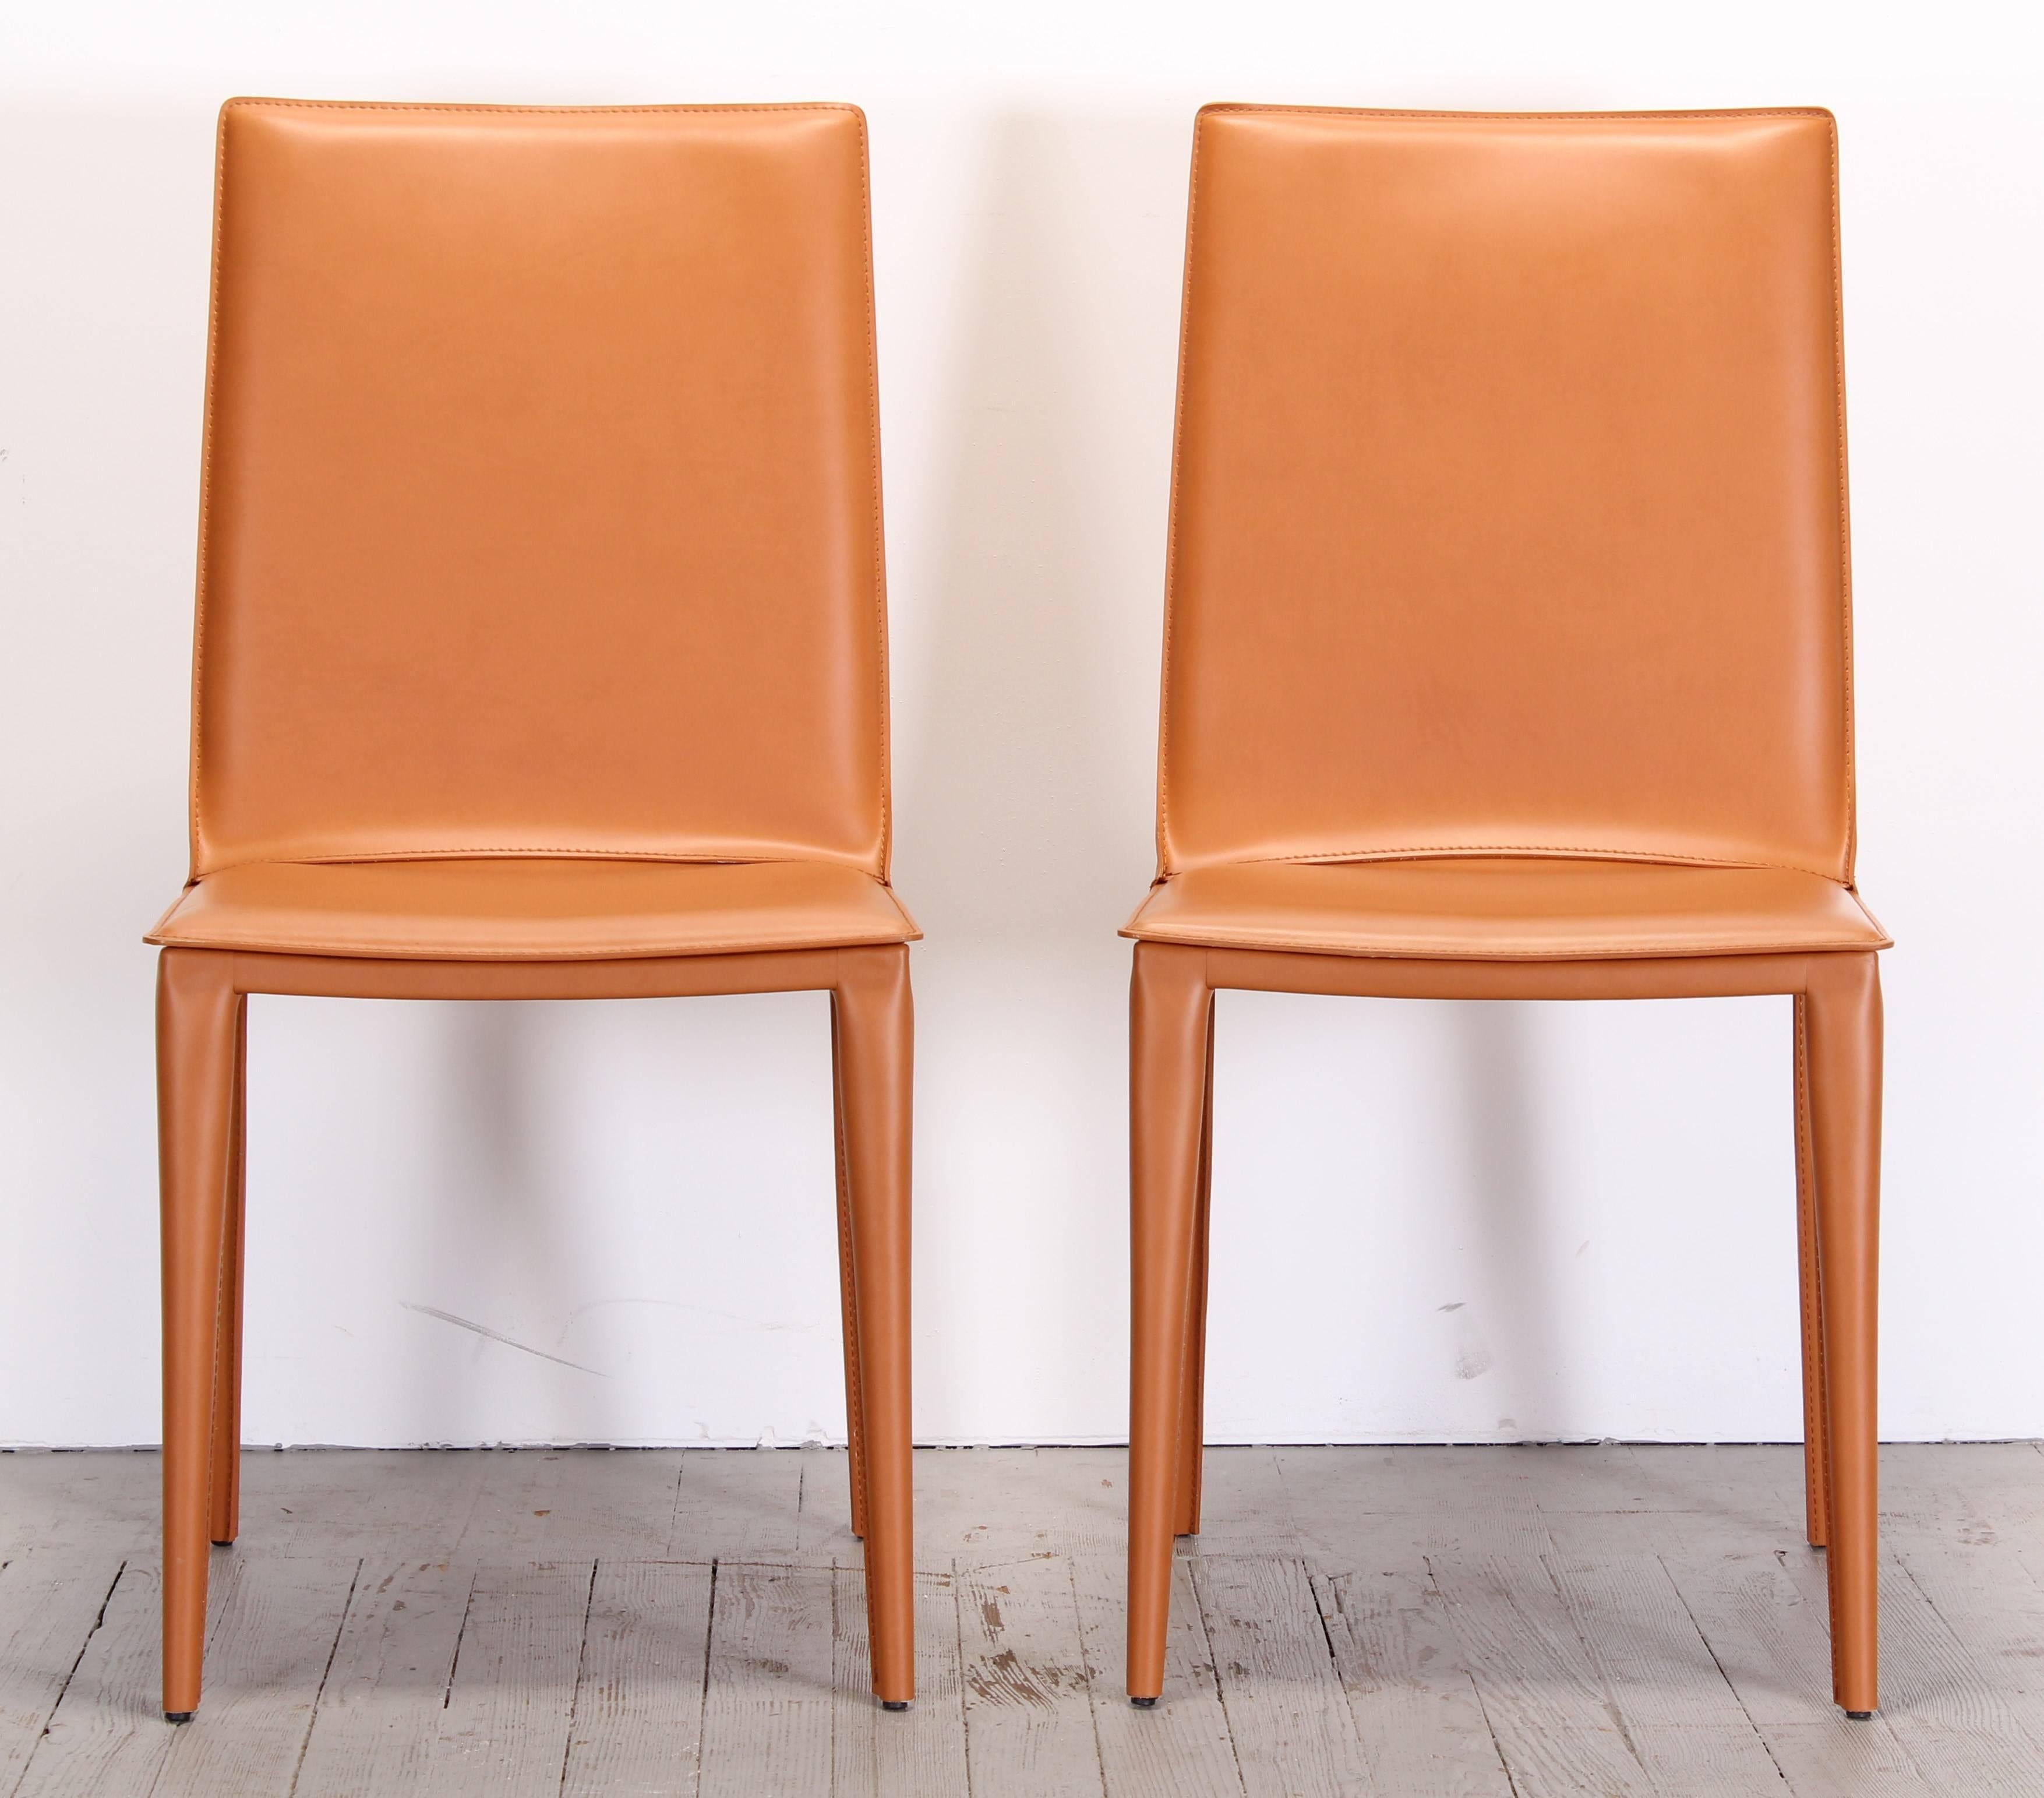 Pair of sleek modern Frag Pradamano leather side chairs, 2000. Only one available, great for a desk chair. 